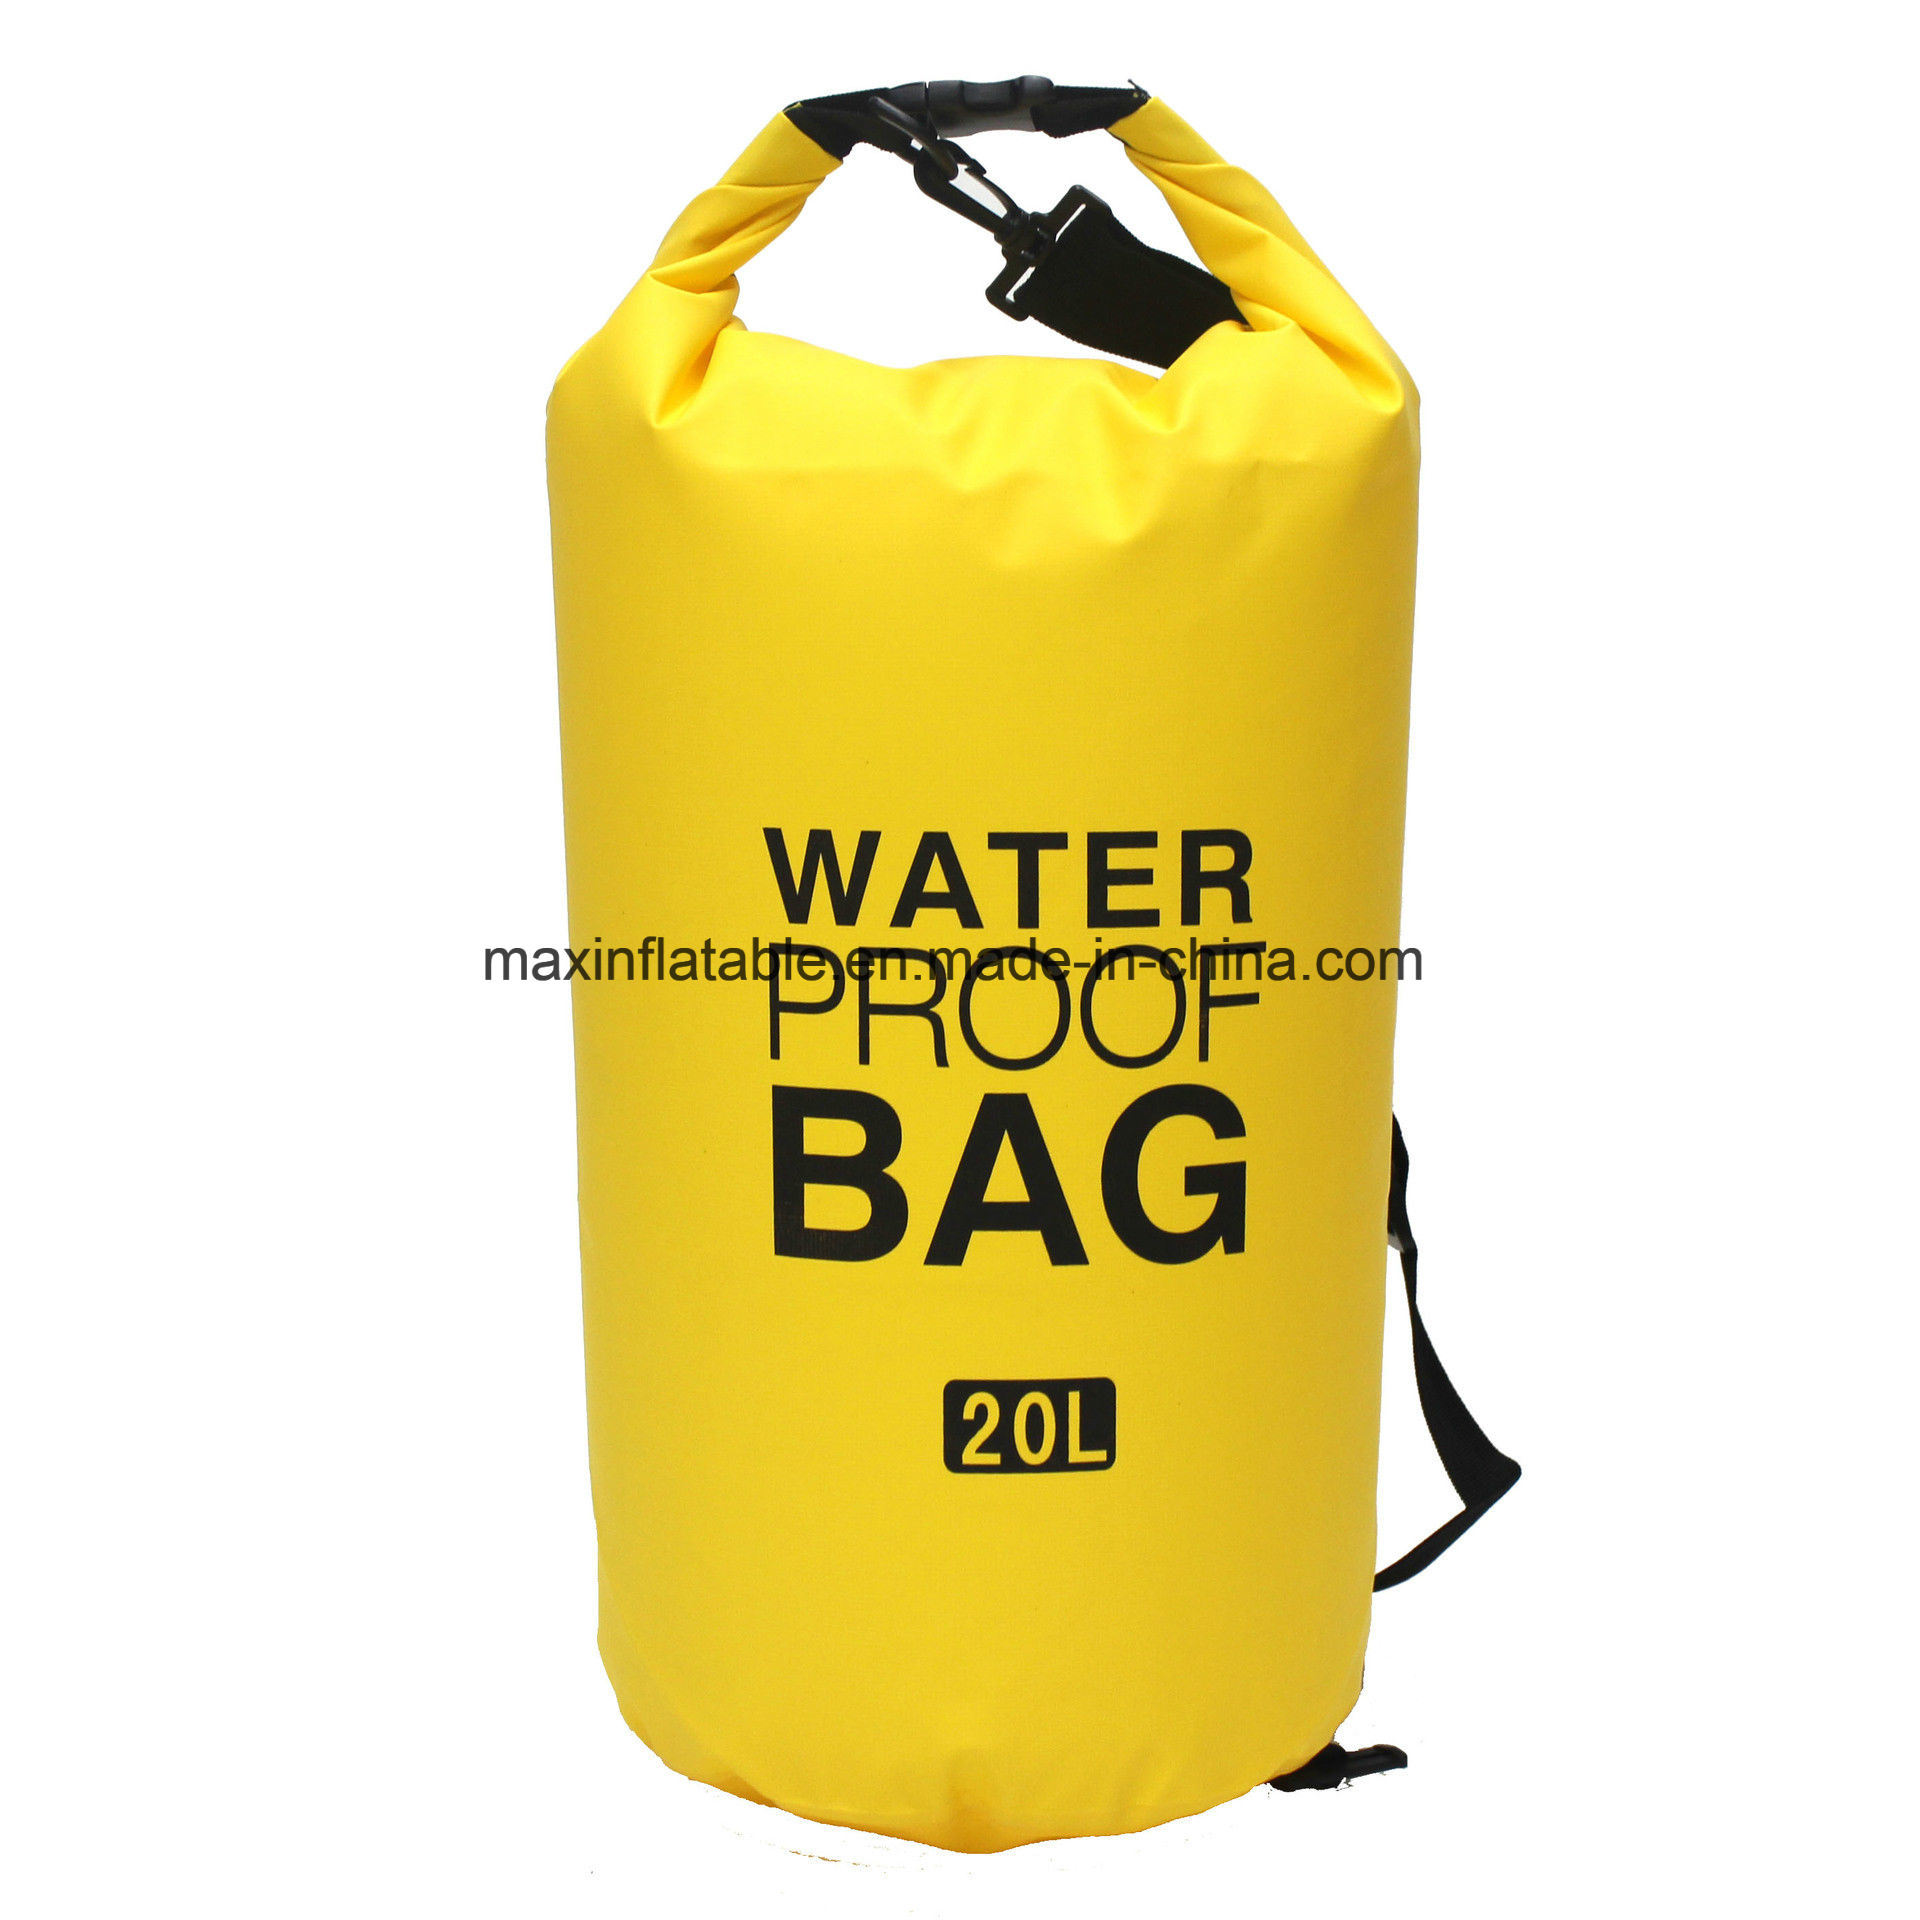 Amazon Hot Sale Floating Waterproof Dry Bag for Outdoor or Camping